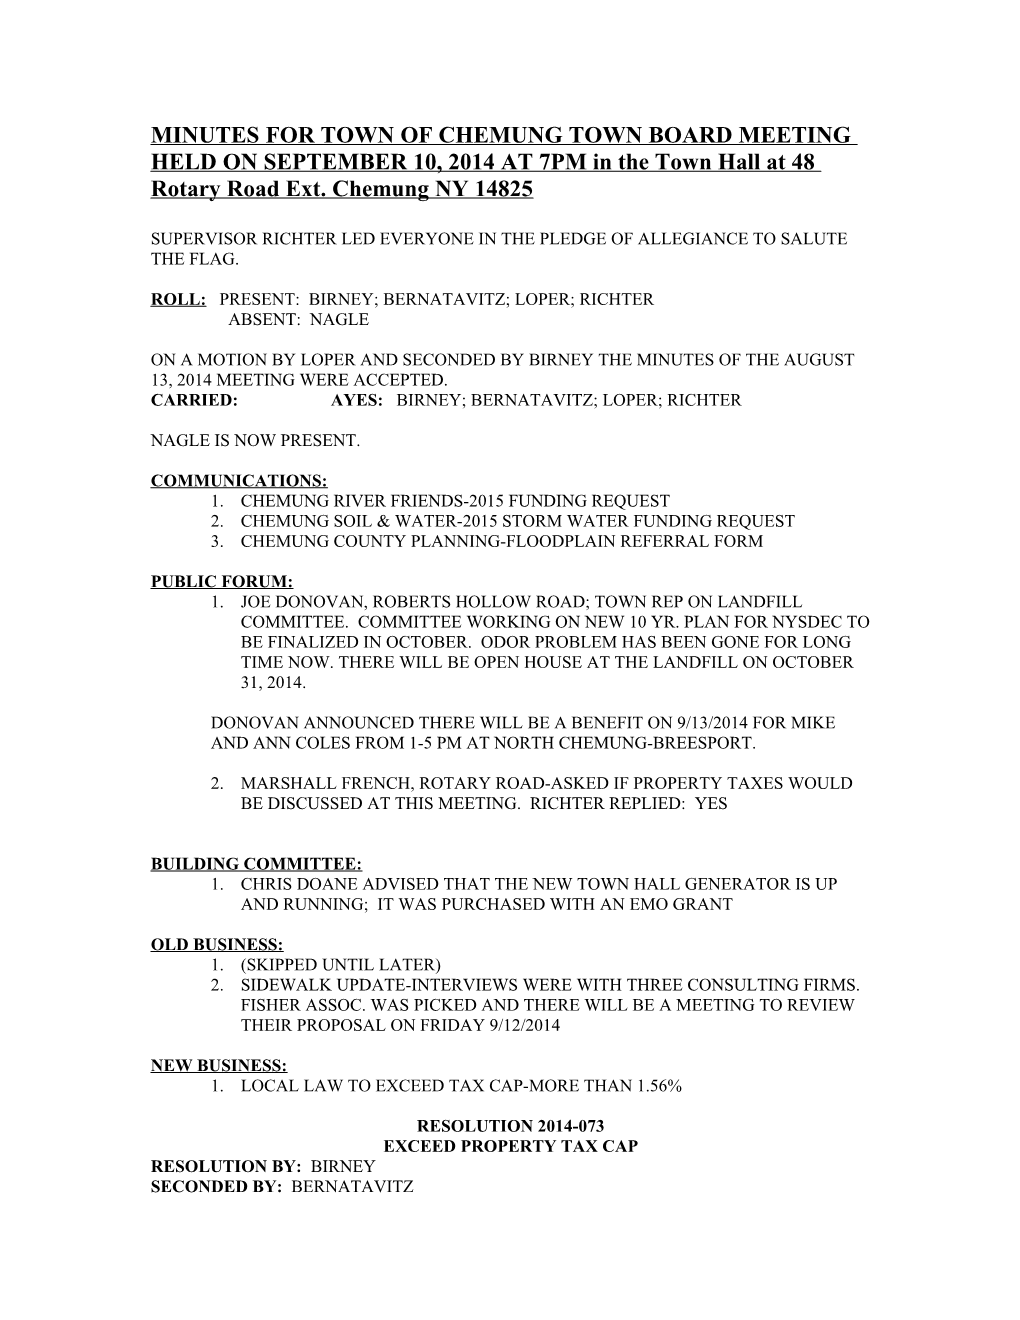 MINUTES for TOWN of CHEMUNG TOWN BOARD MEETING HELD on JULY 10, 2013 at 7PM in the Town s5